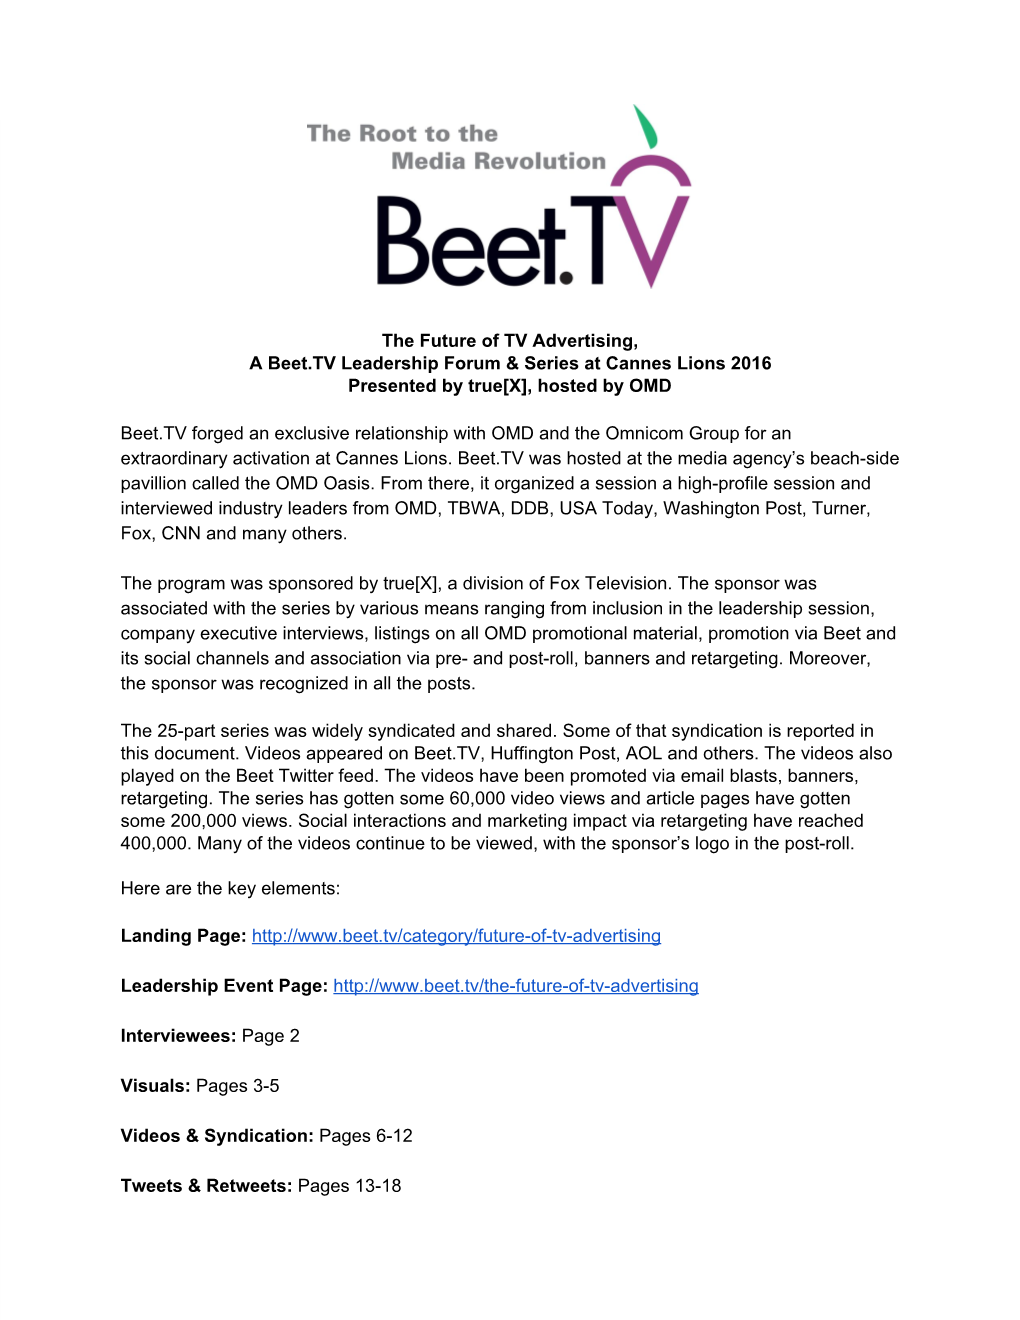 The Future of TV Advertising, a Beet.TV Leadership Forum & Series